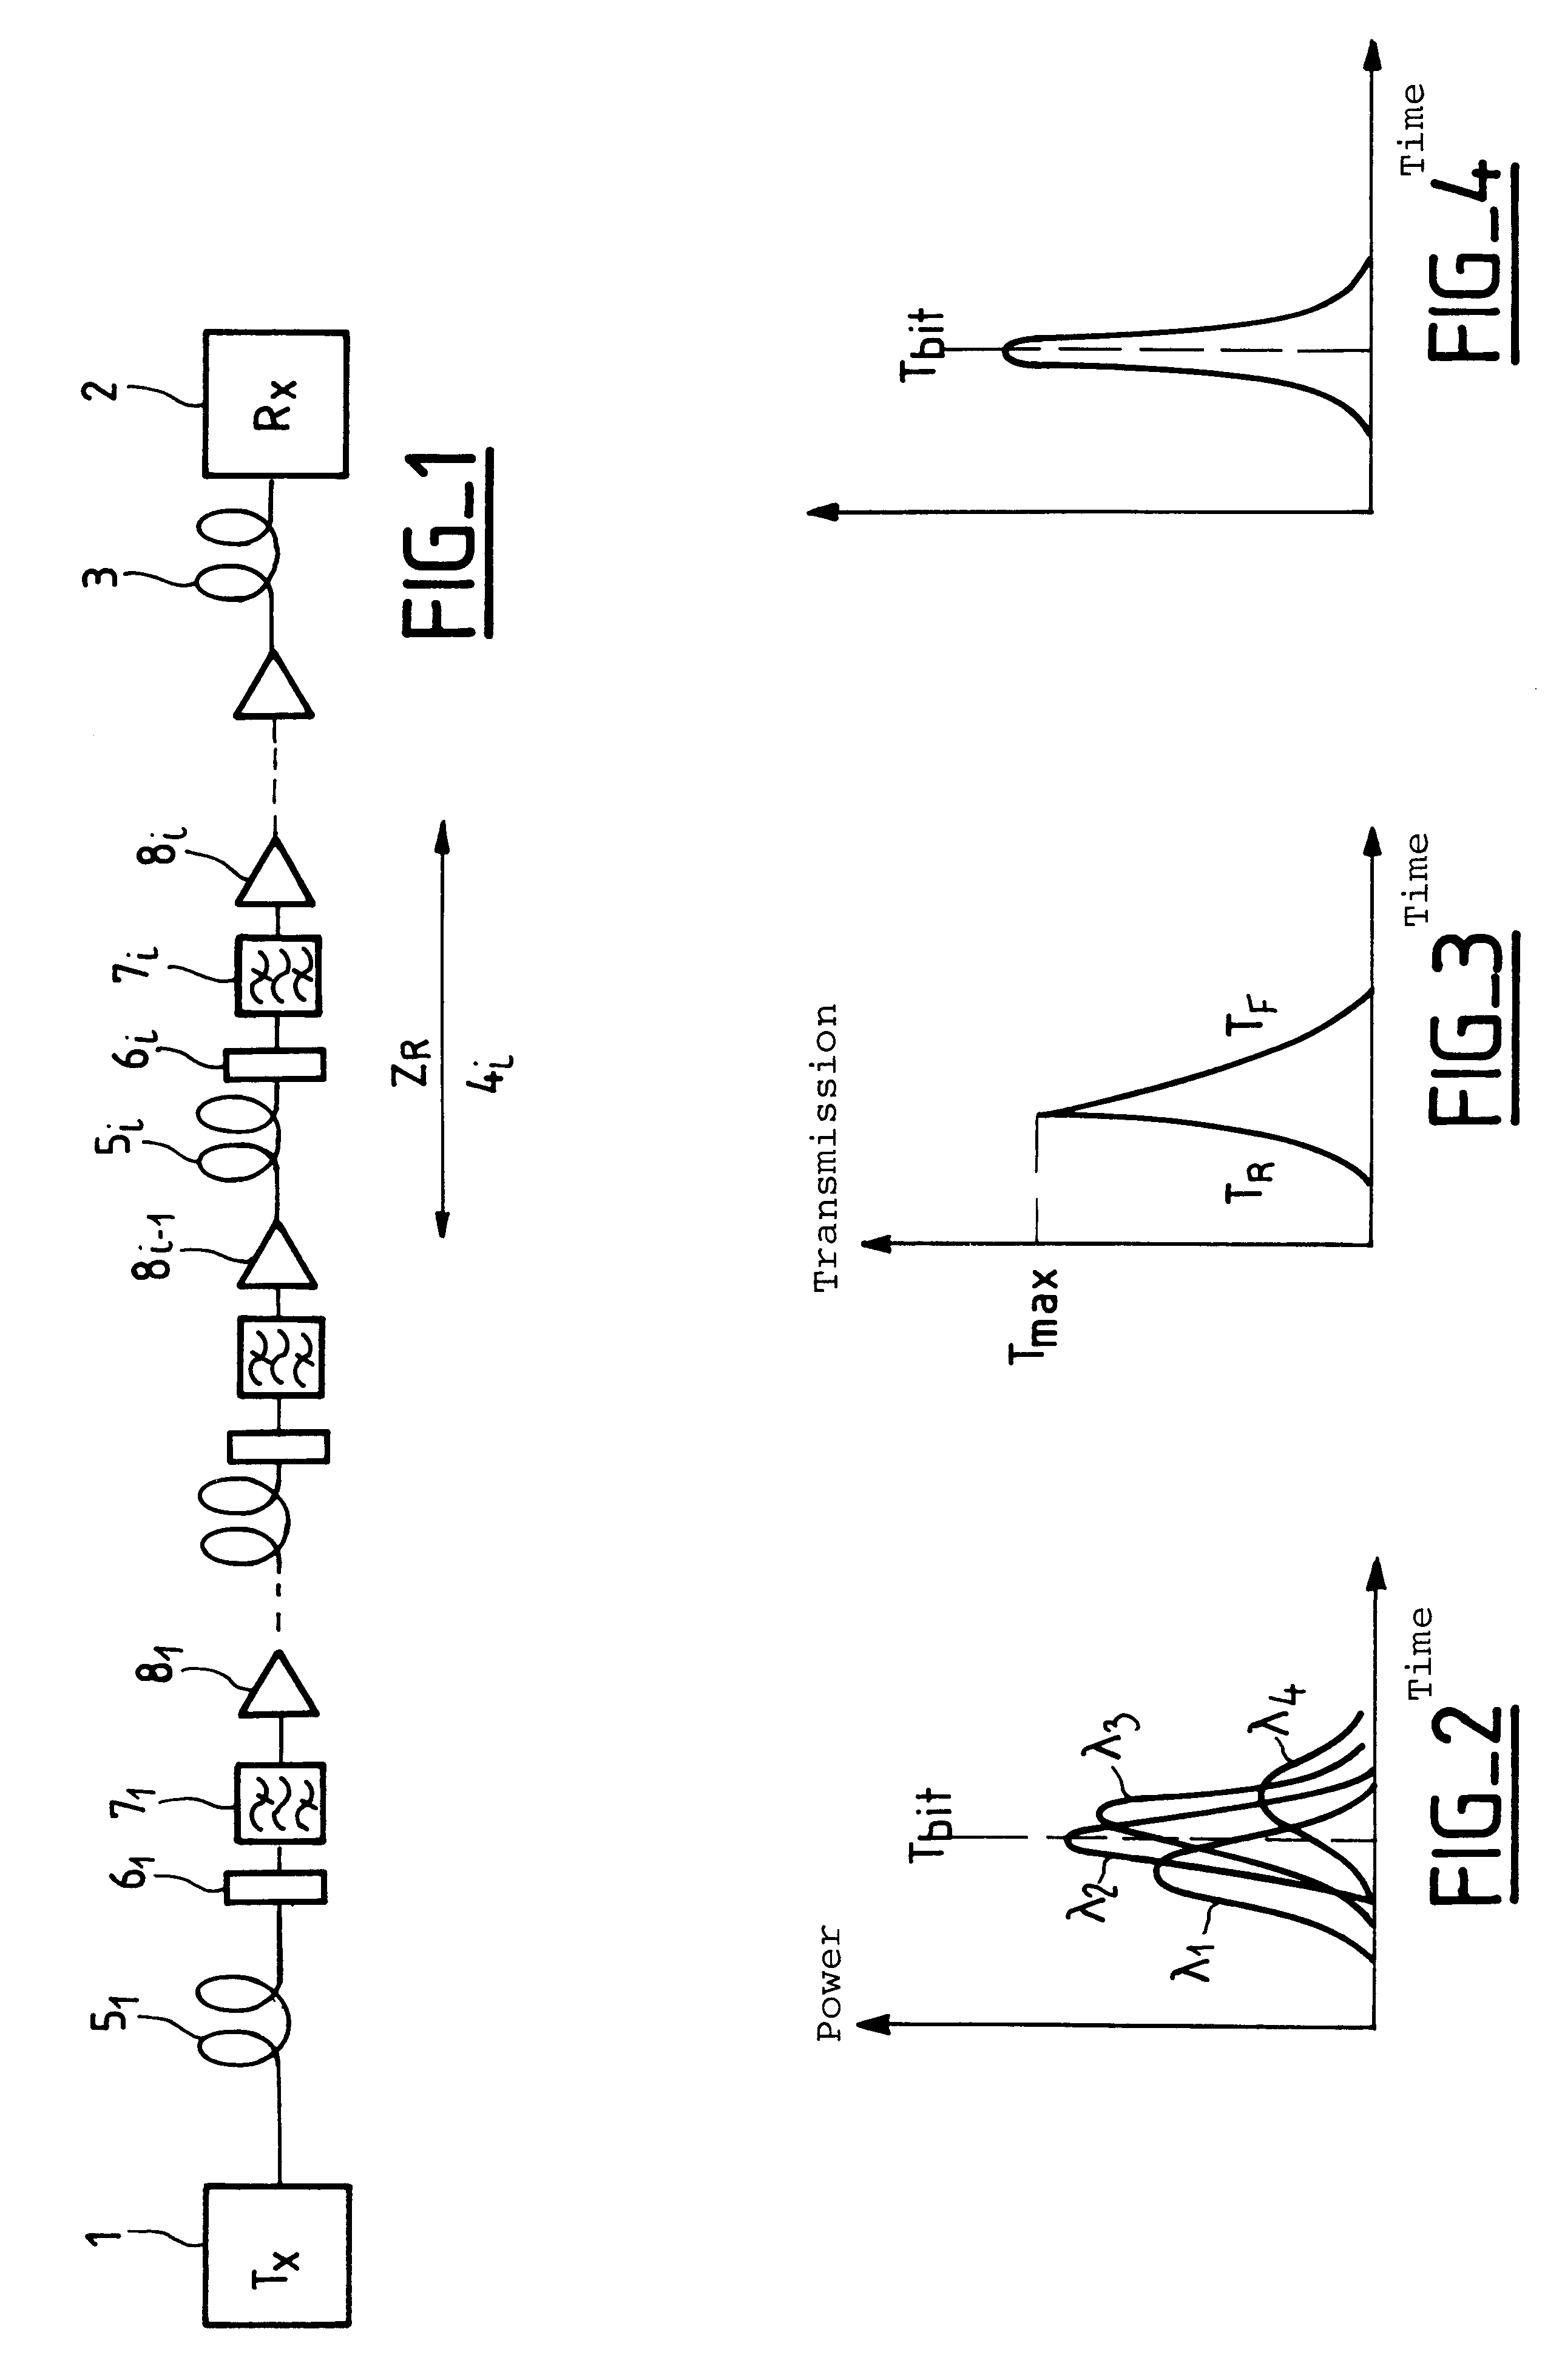 Optical fiber transmission system for soliton signals with wavelength multiplexing and saturable absorbers